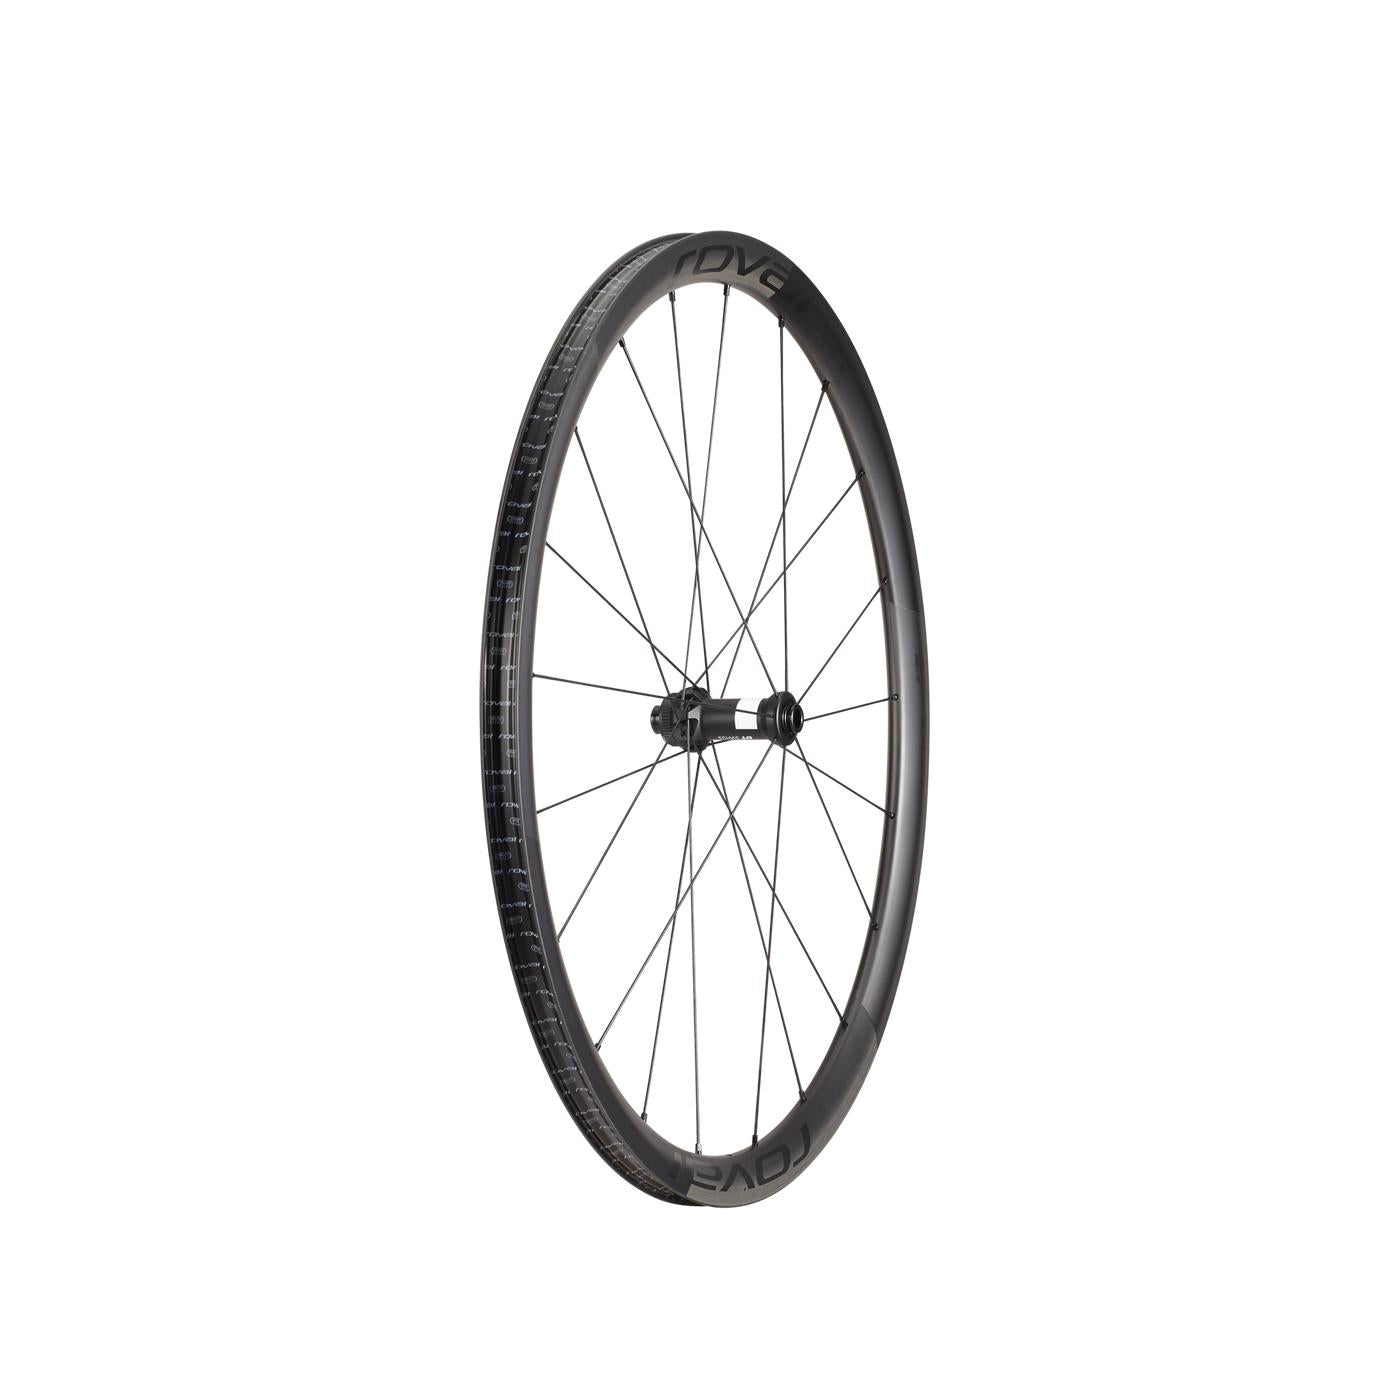 Specialized Roval Alpinist CL II 700c Front Bicycle Wheel - Wheels - Bicycle Warehouse